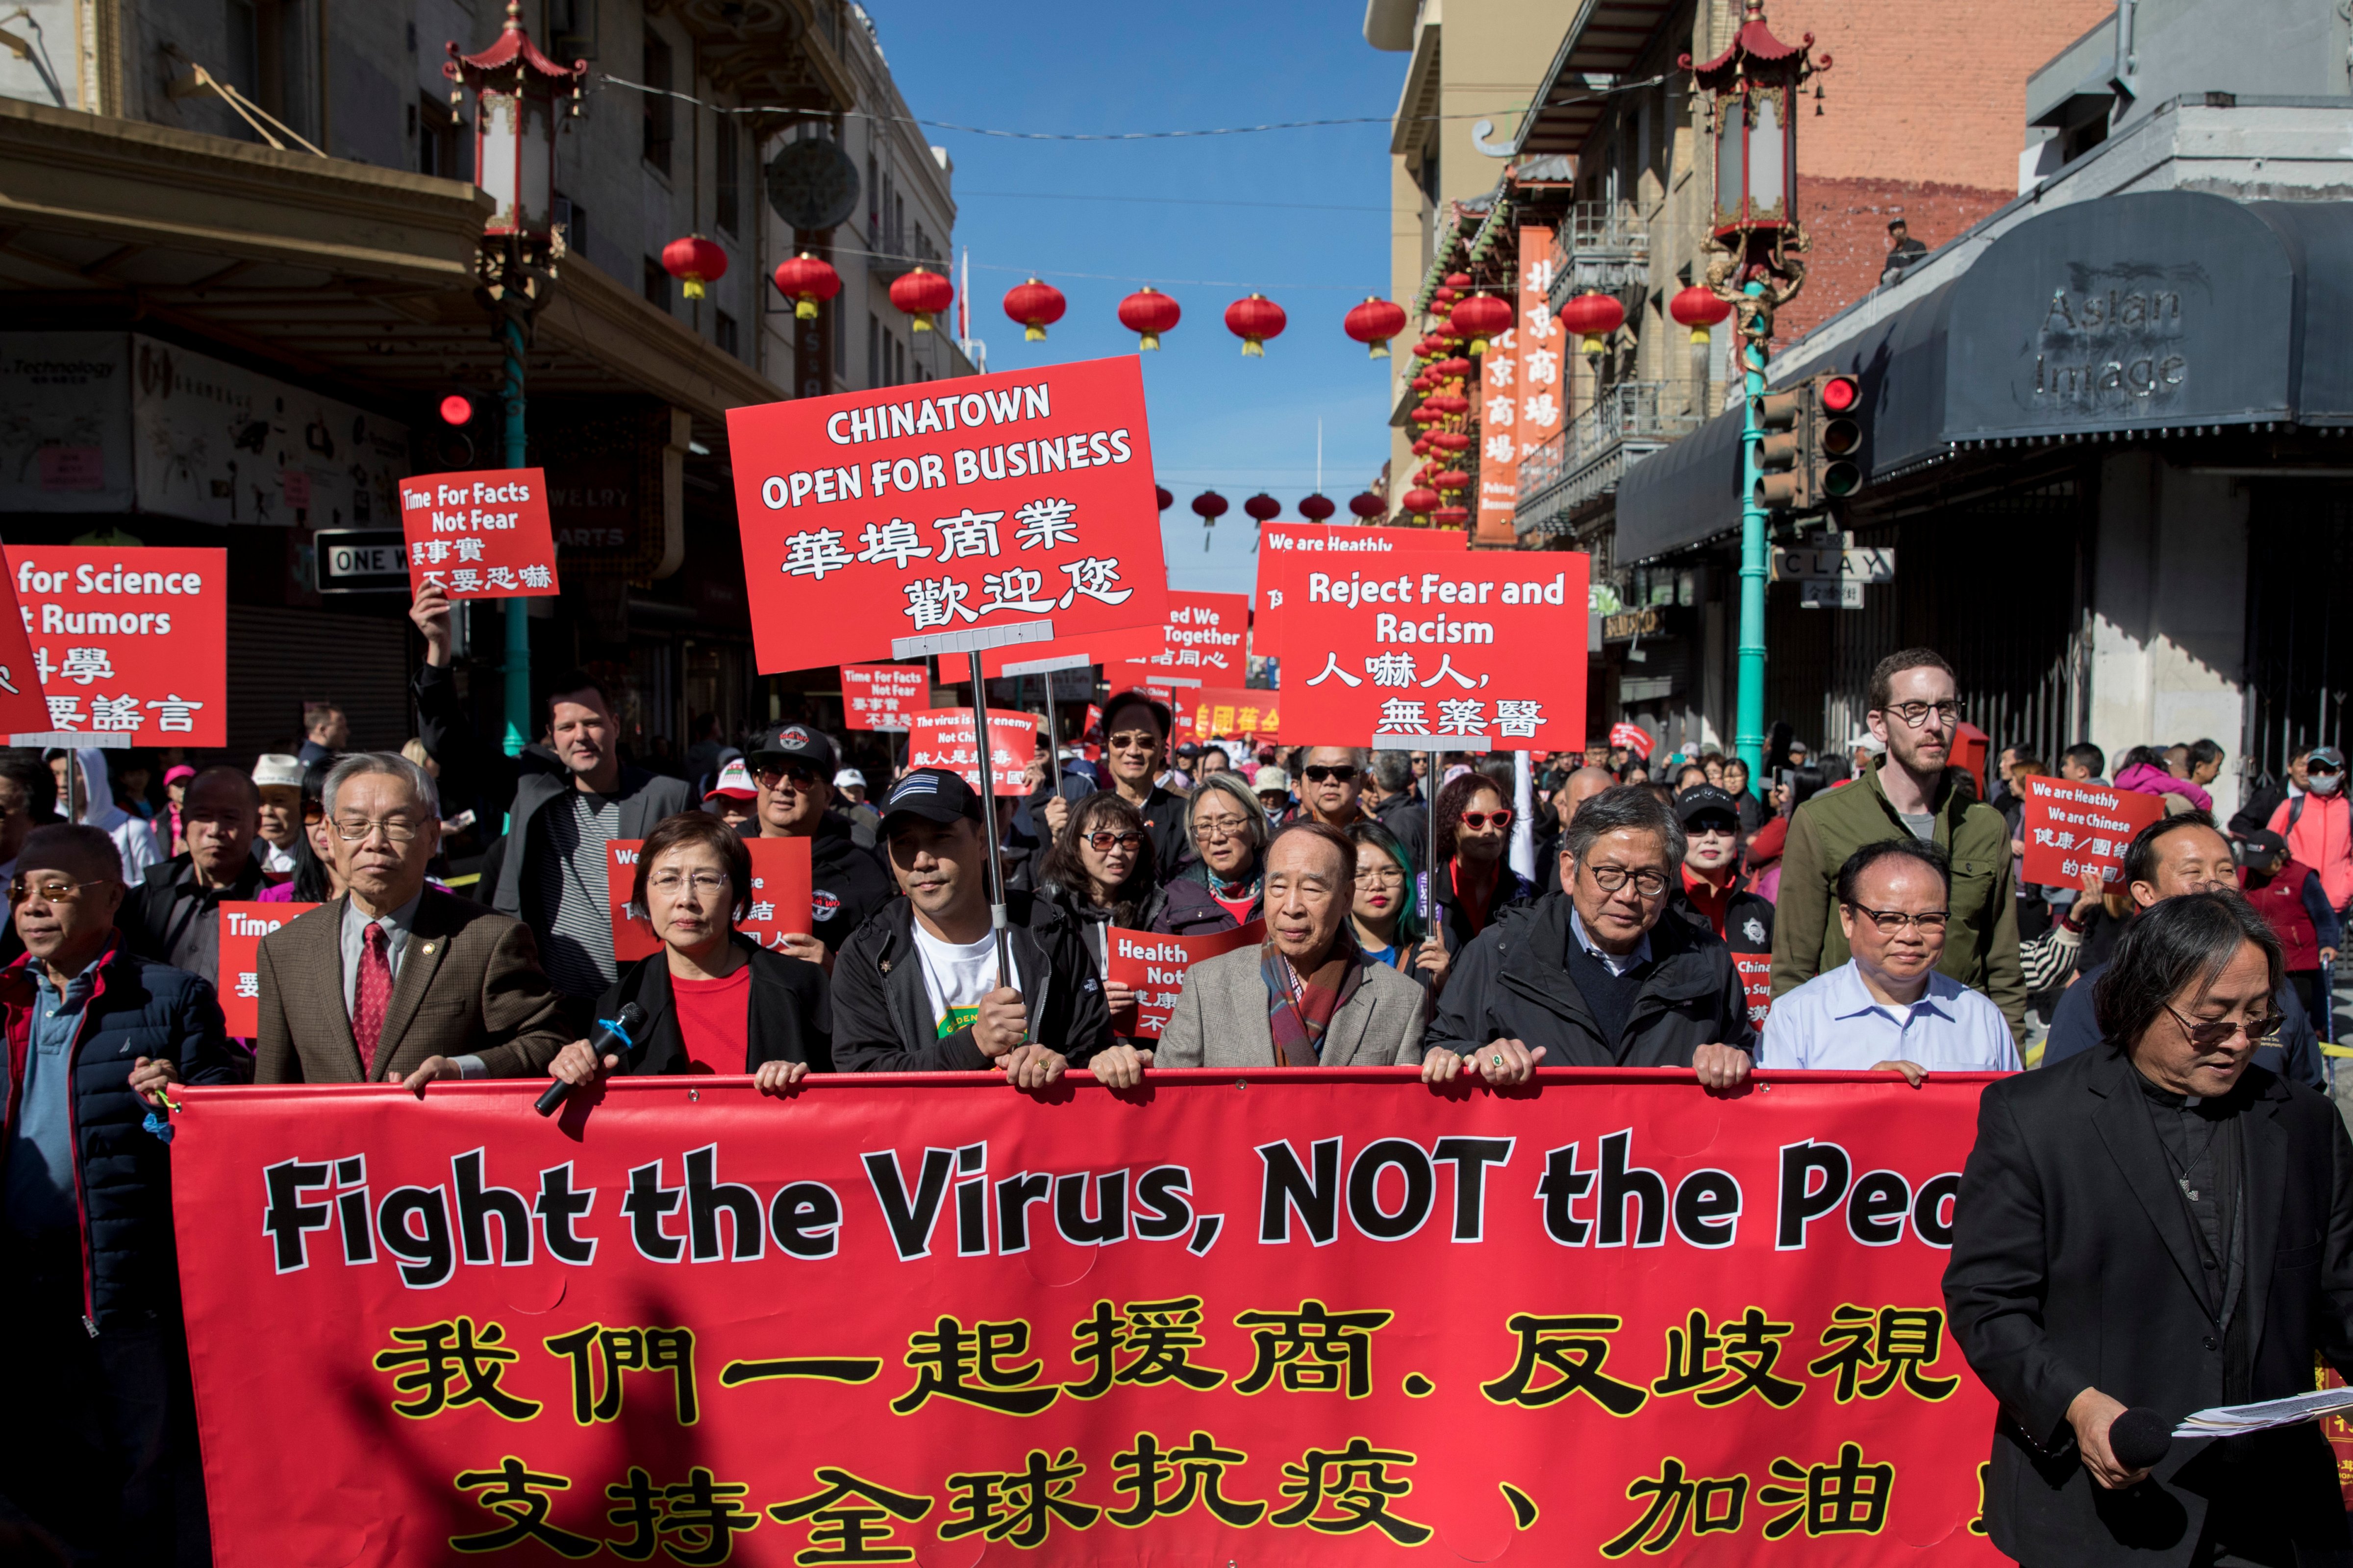 Chinatown residents protest against racism against the Chinese community in San Francisco in February. (Jessica Christian/The San Francisco Chronicle via Getty Images)